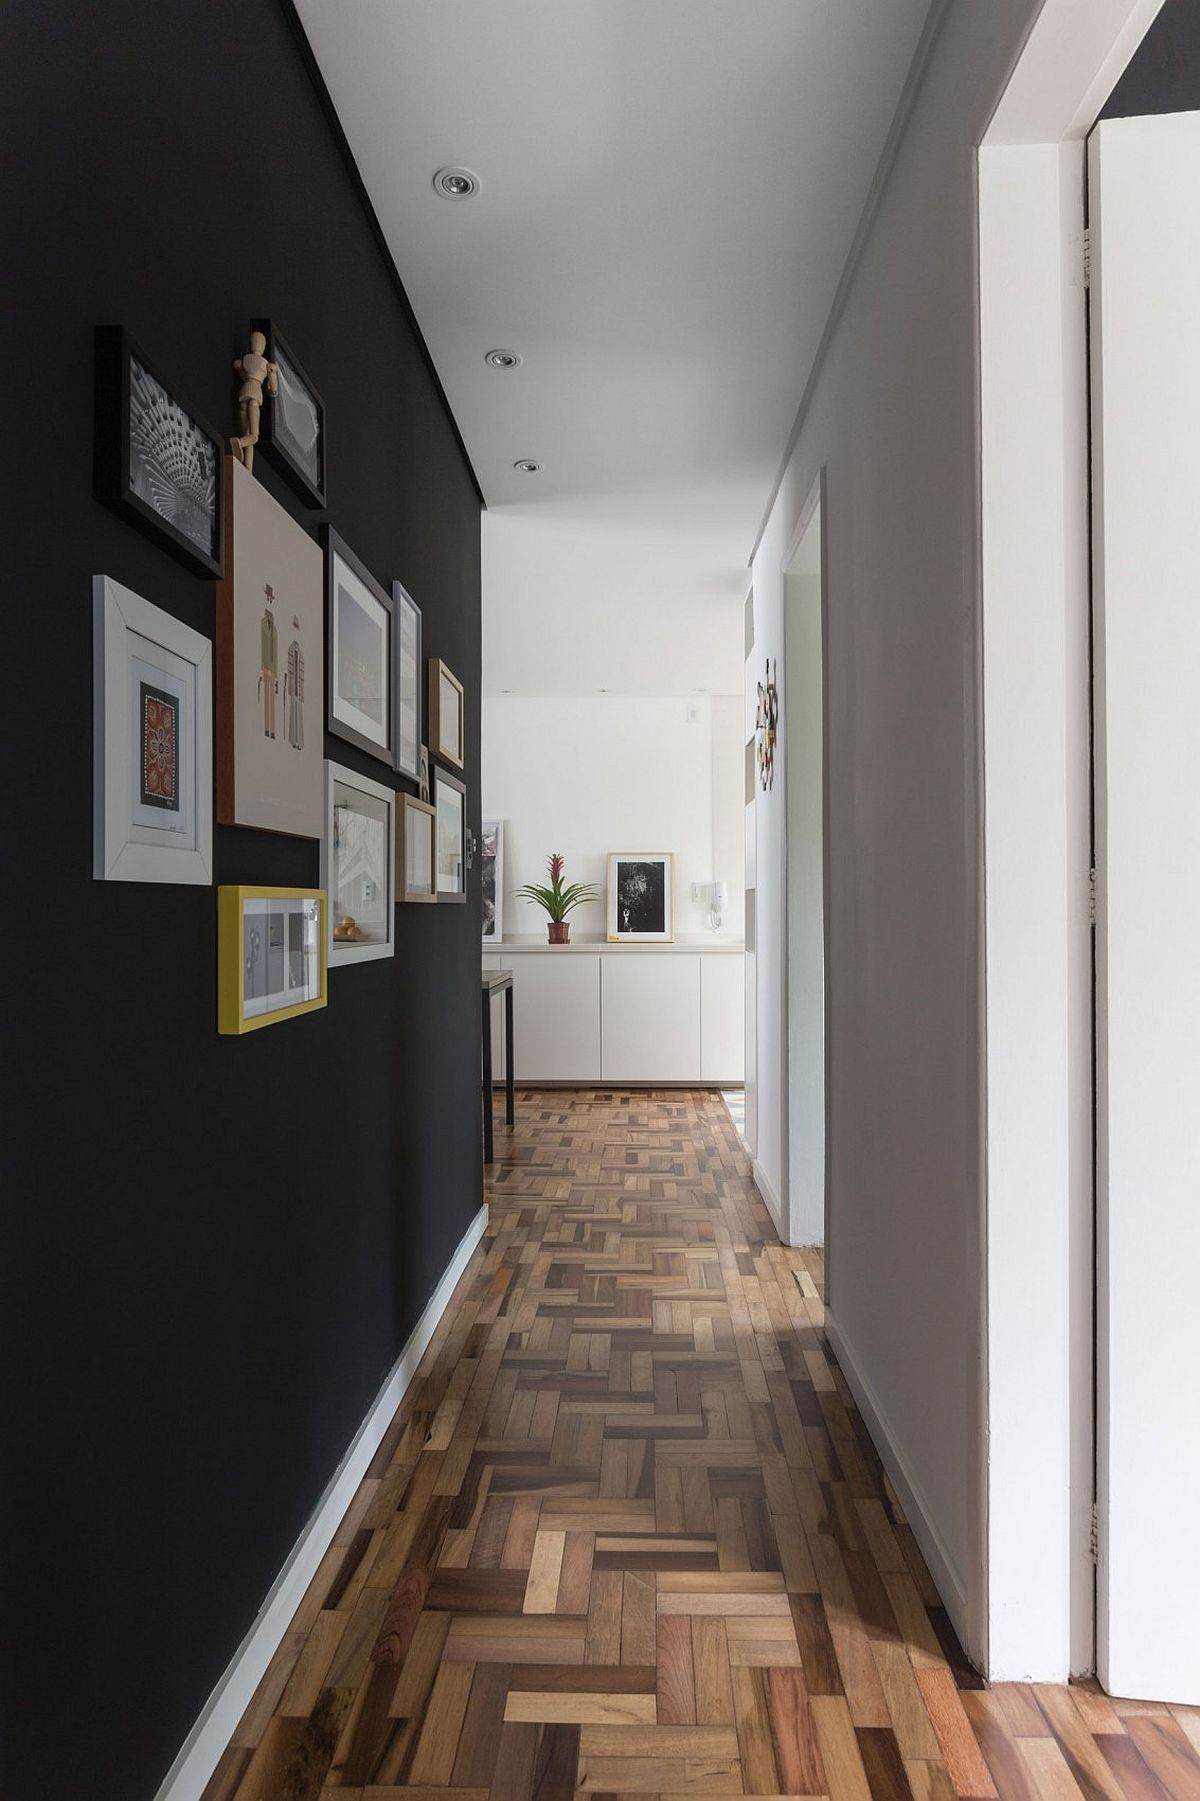 Gallery wall leads way to the bedrooms from the living space